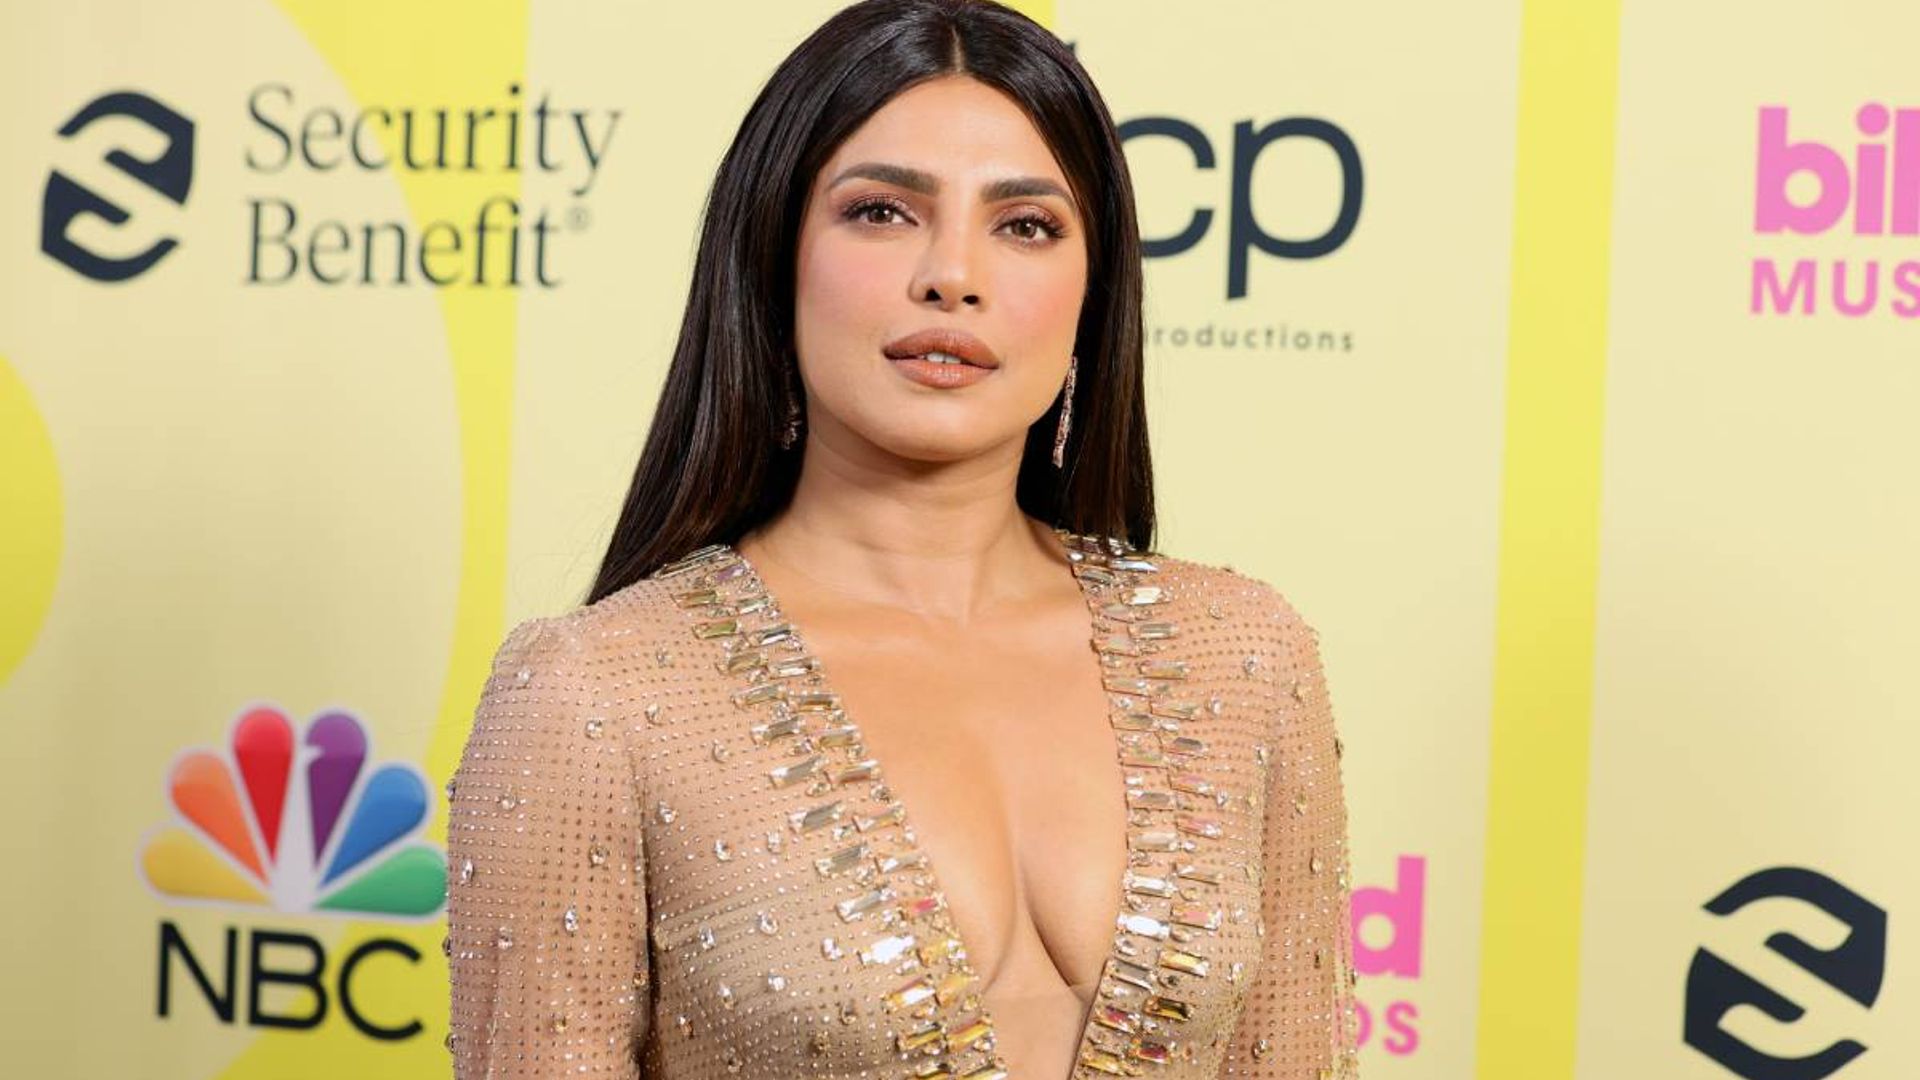 Priyanka Chopra stuns in a chic resort co-ord as she shares a heartfelt message with fans 